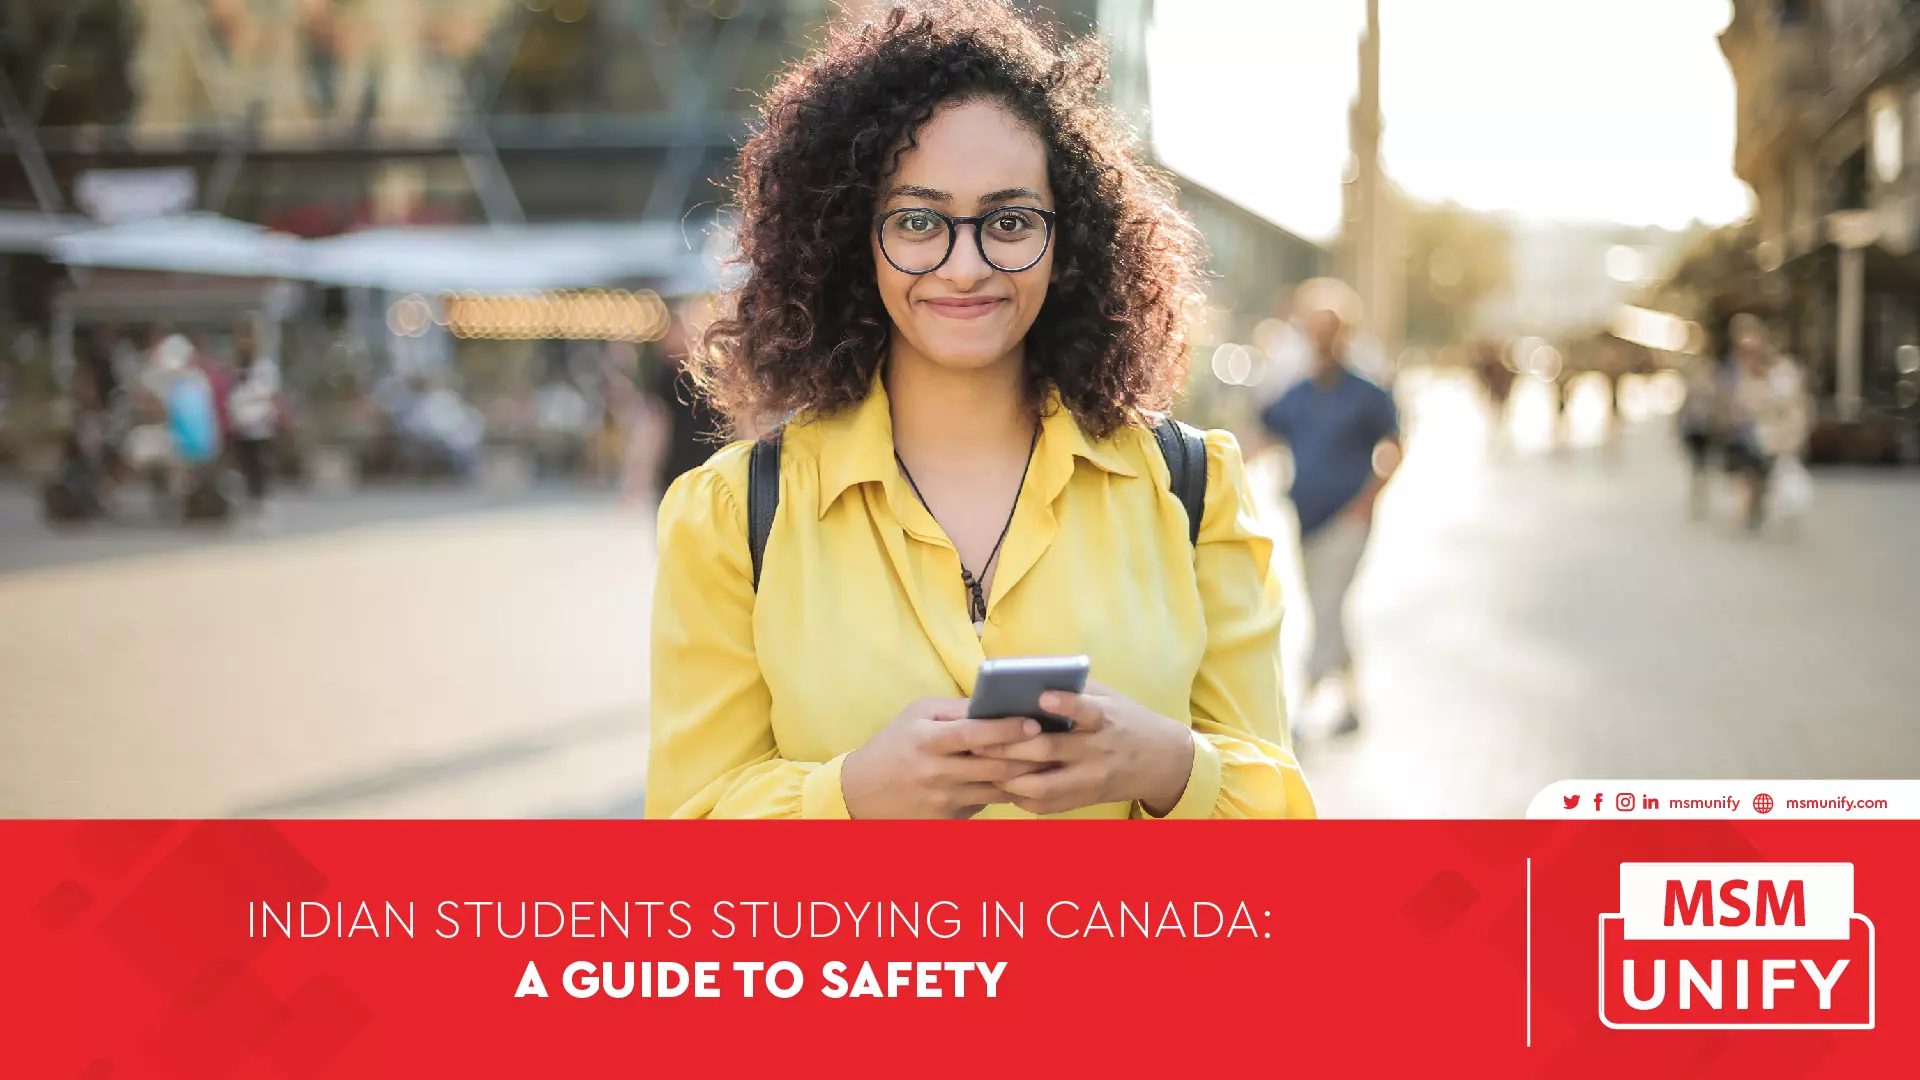 111822 MSM Unify Indian Students Studying in Canada A Guide to Safety 01